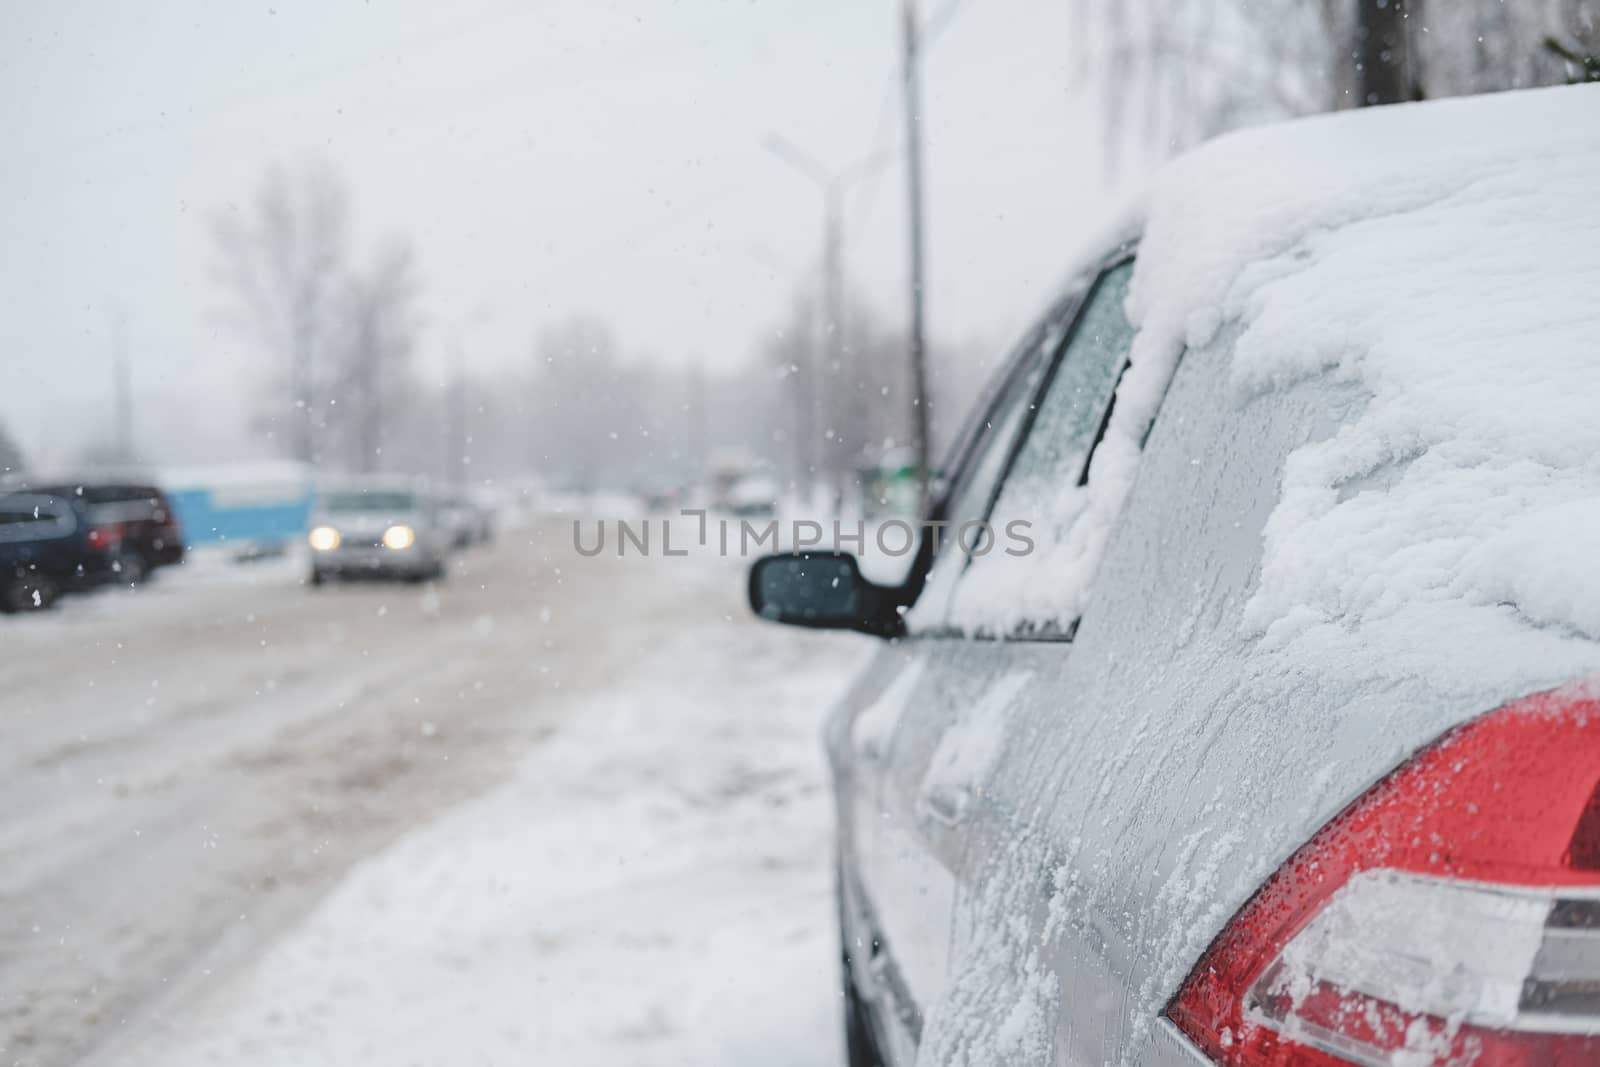 A vehicle covered in snow on the road. Slow traffic in winter storm, road filled with wet snow